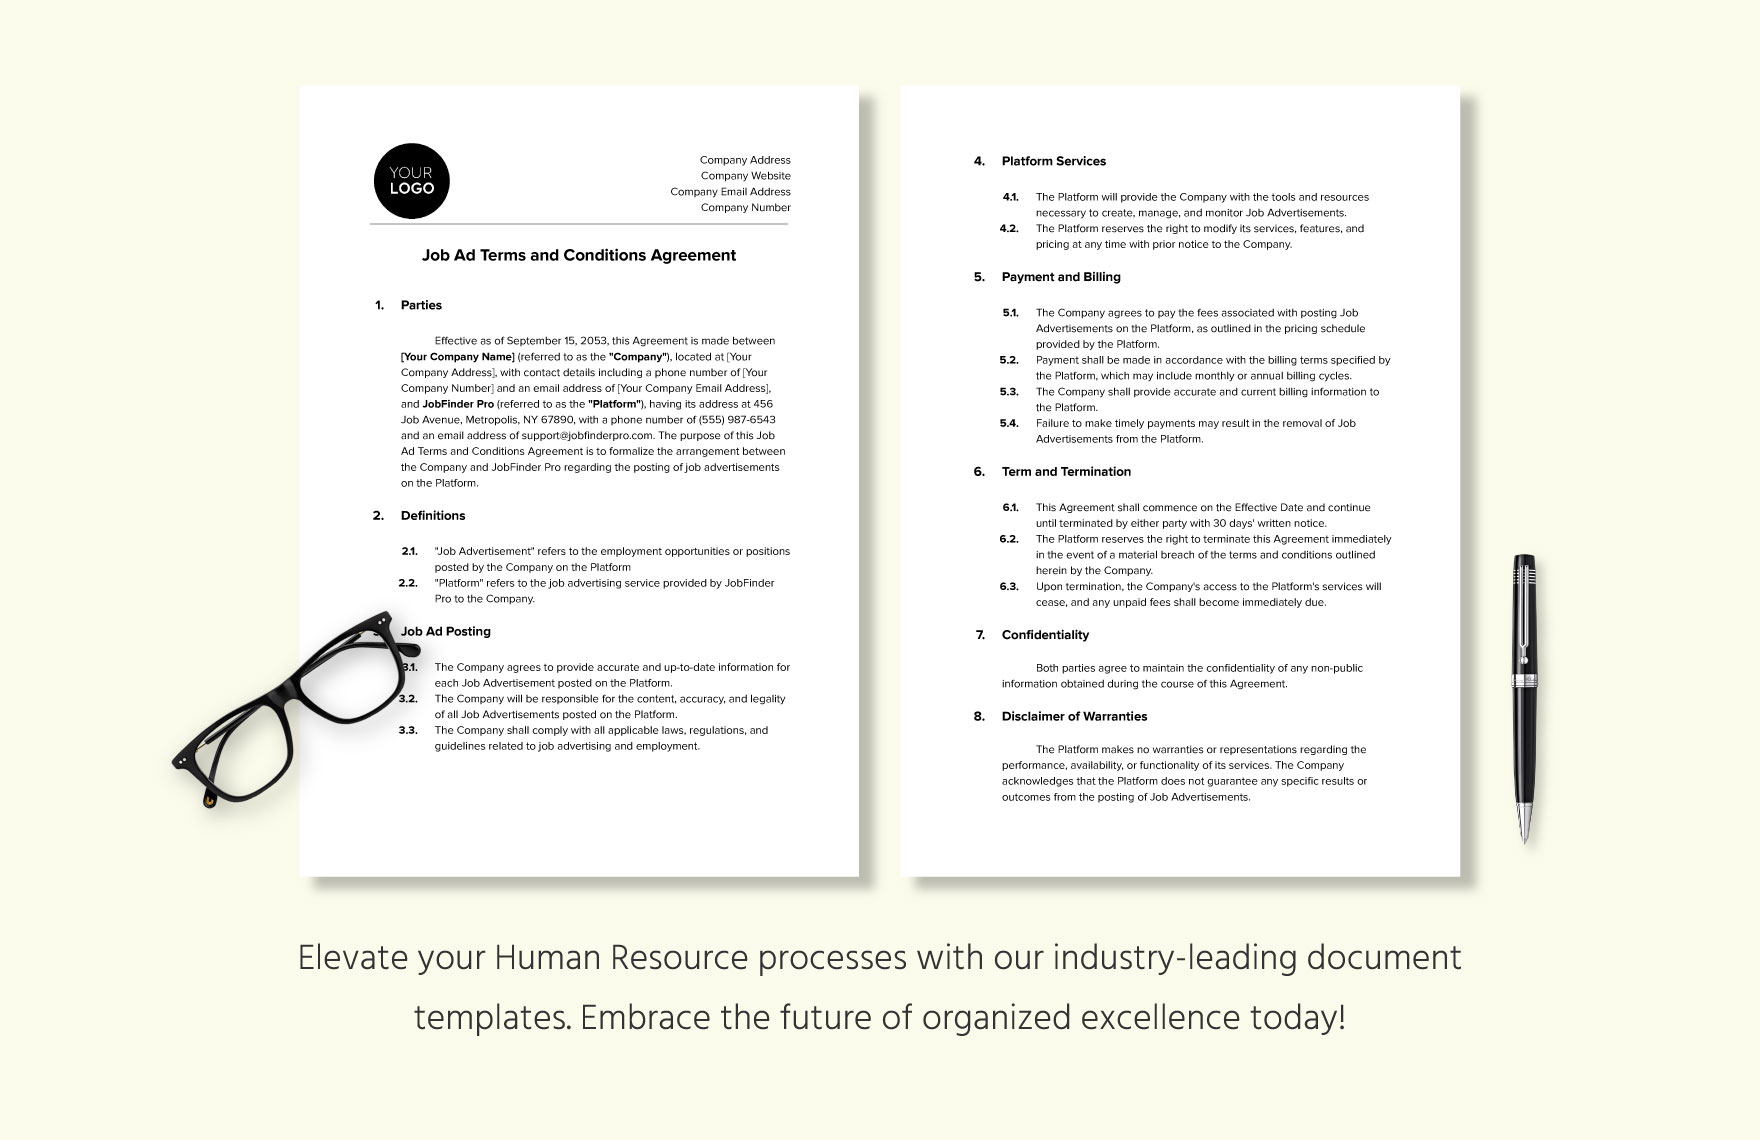 Job Ad Terms and Conditions Agreement HR Template